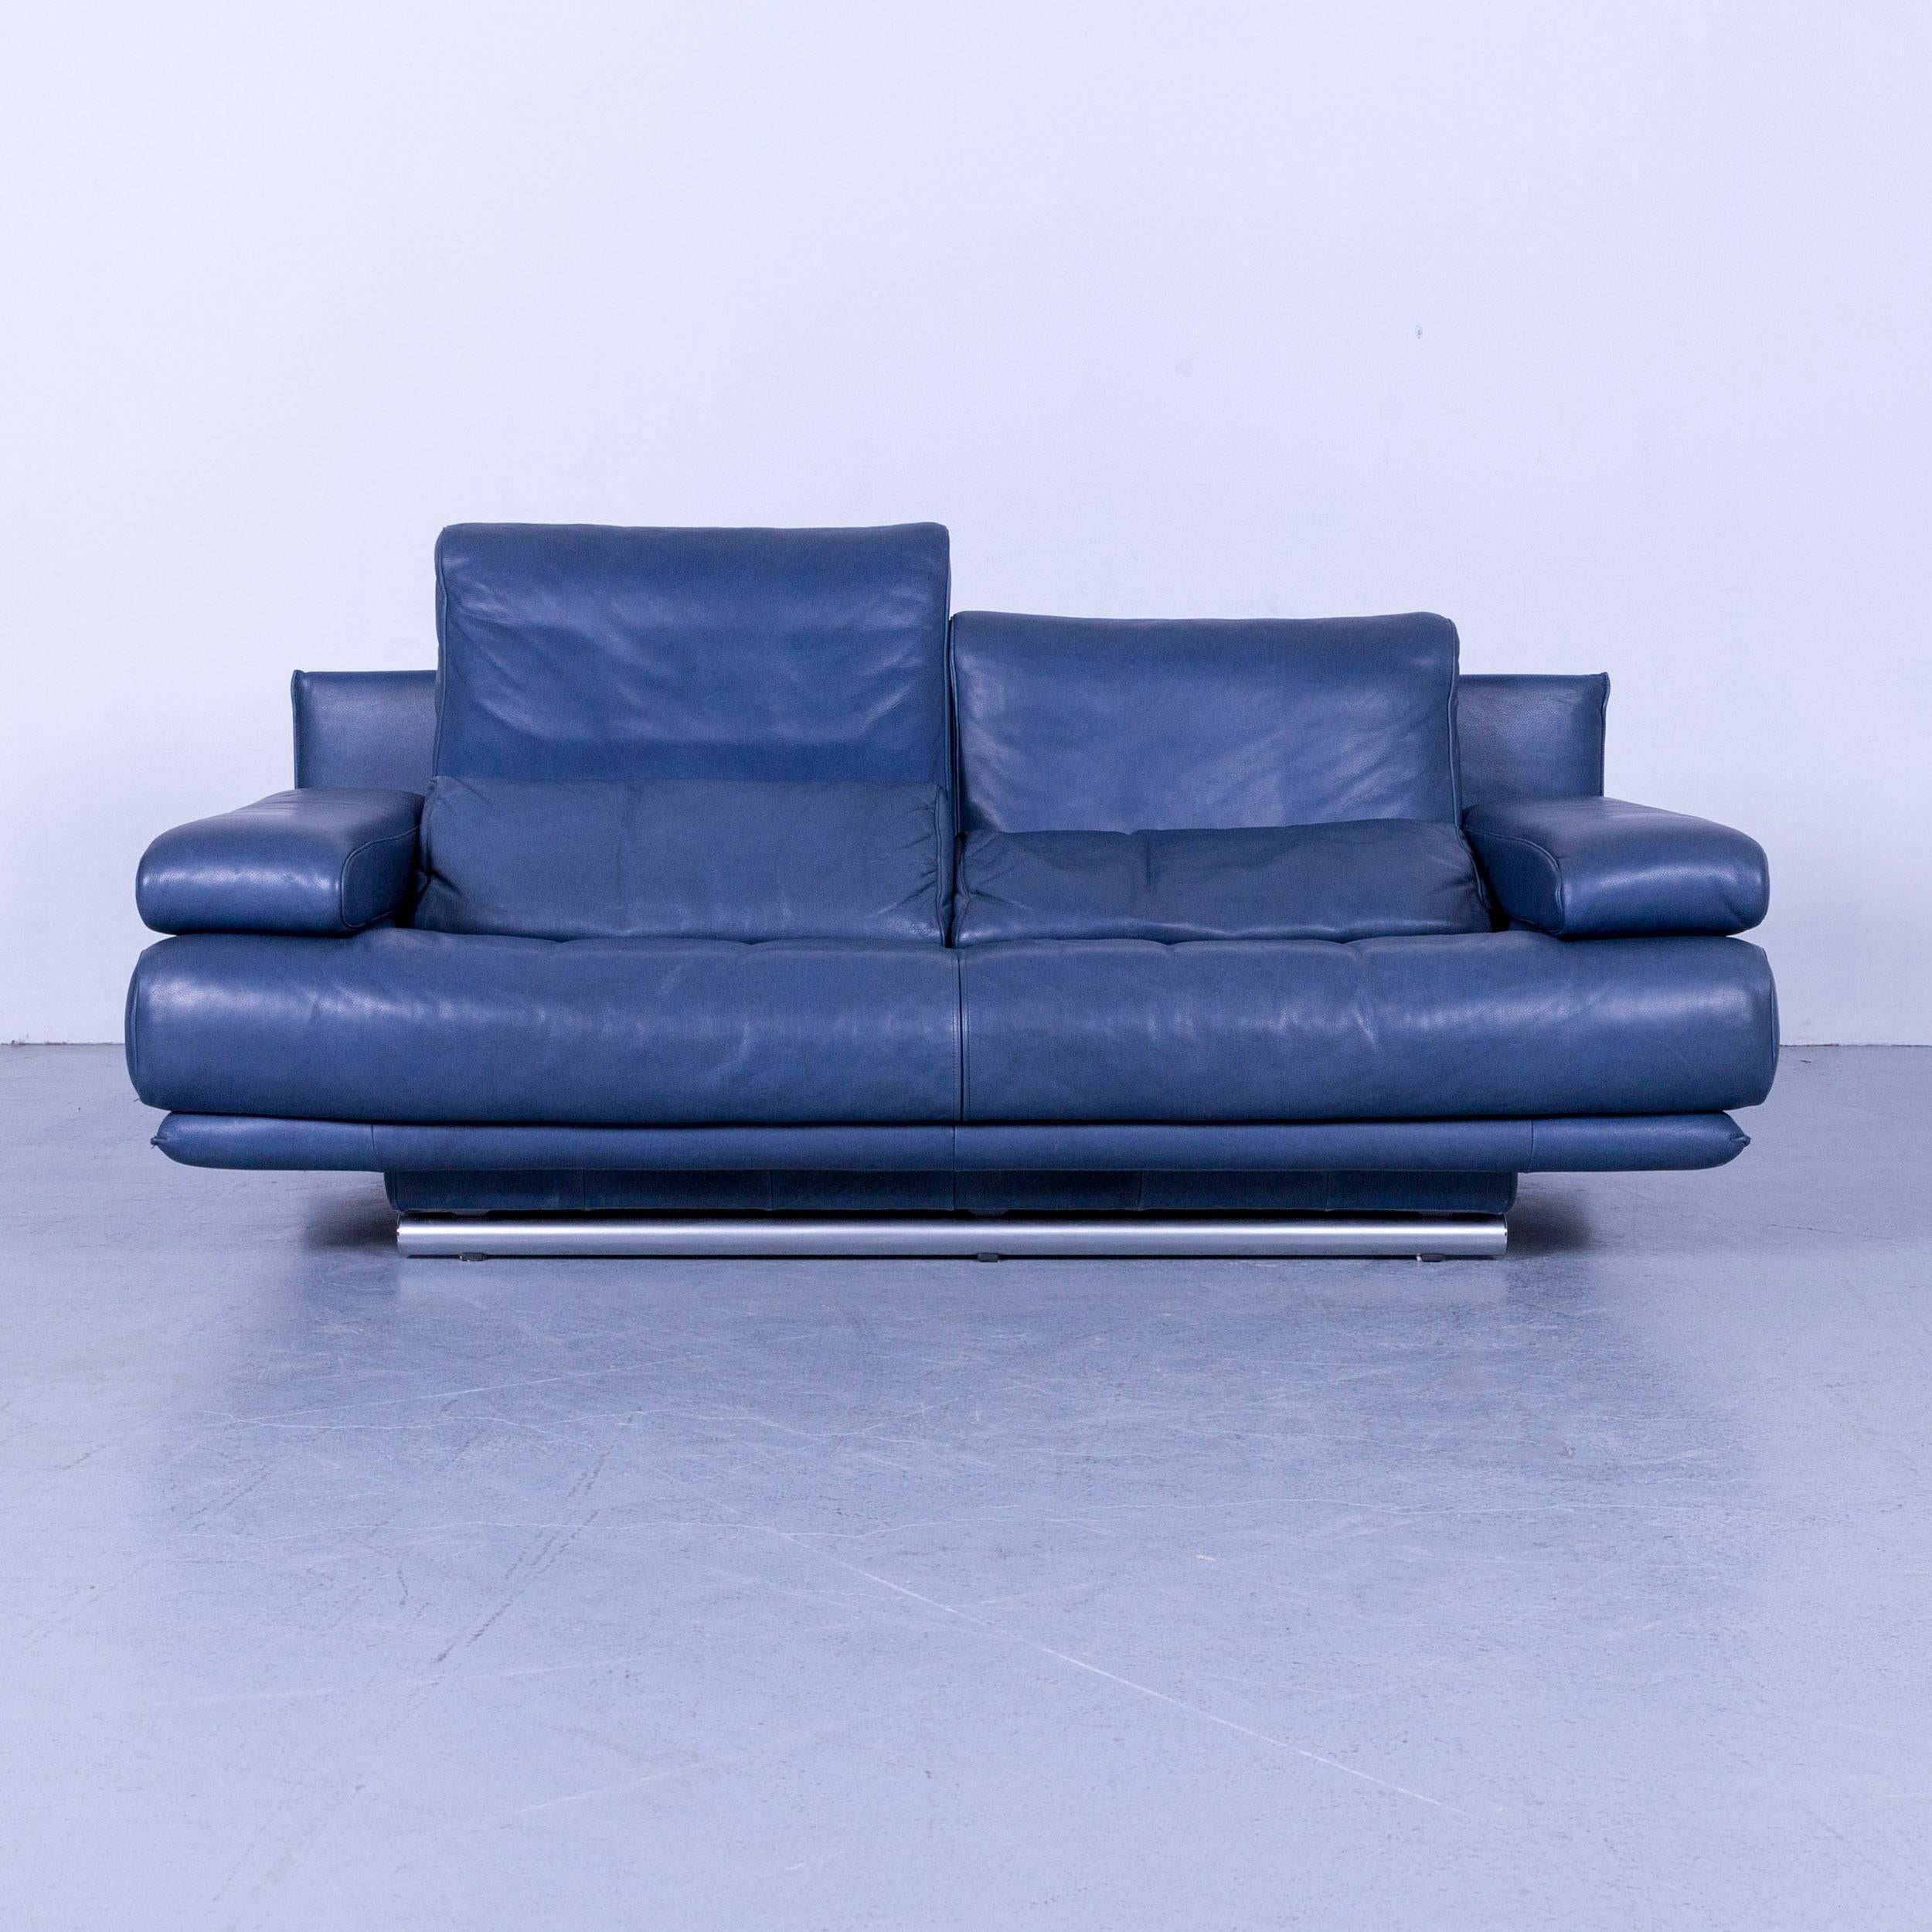 Rolf Benz 6500 Designer Leather Sofa Blue Two-Seat 1